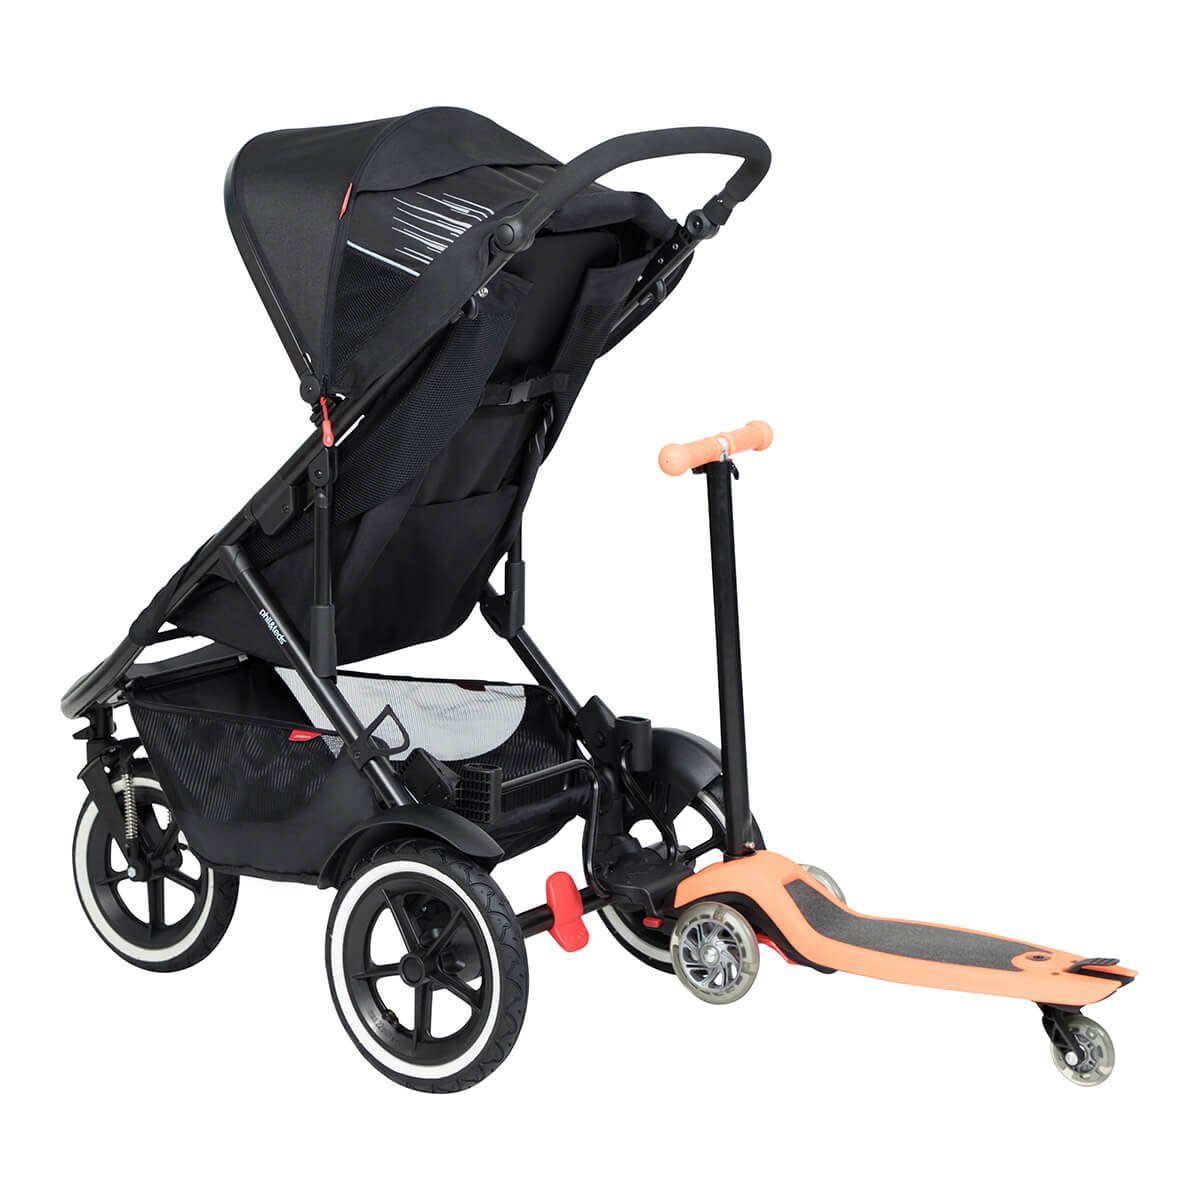 https://cdn.accentuate.io/4509528653912/19272668348504/philteds-sport-poussette-with-freerider-stroller-board-in-rear-v1626484553038.jpg?1200x1200